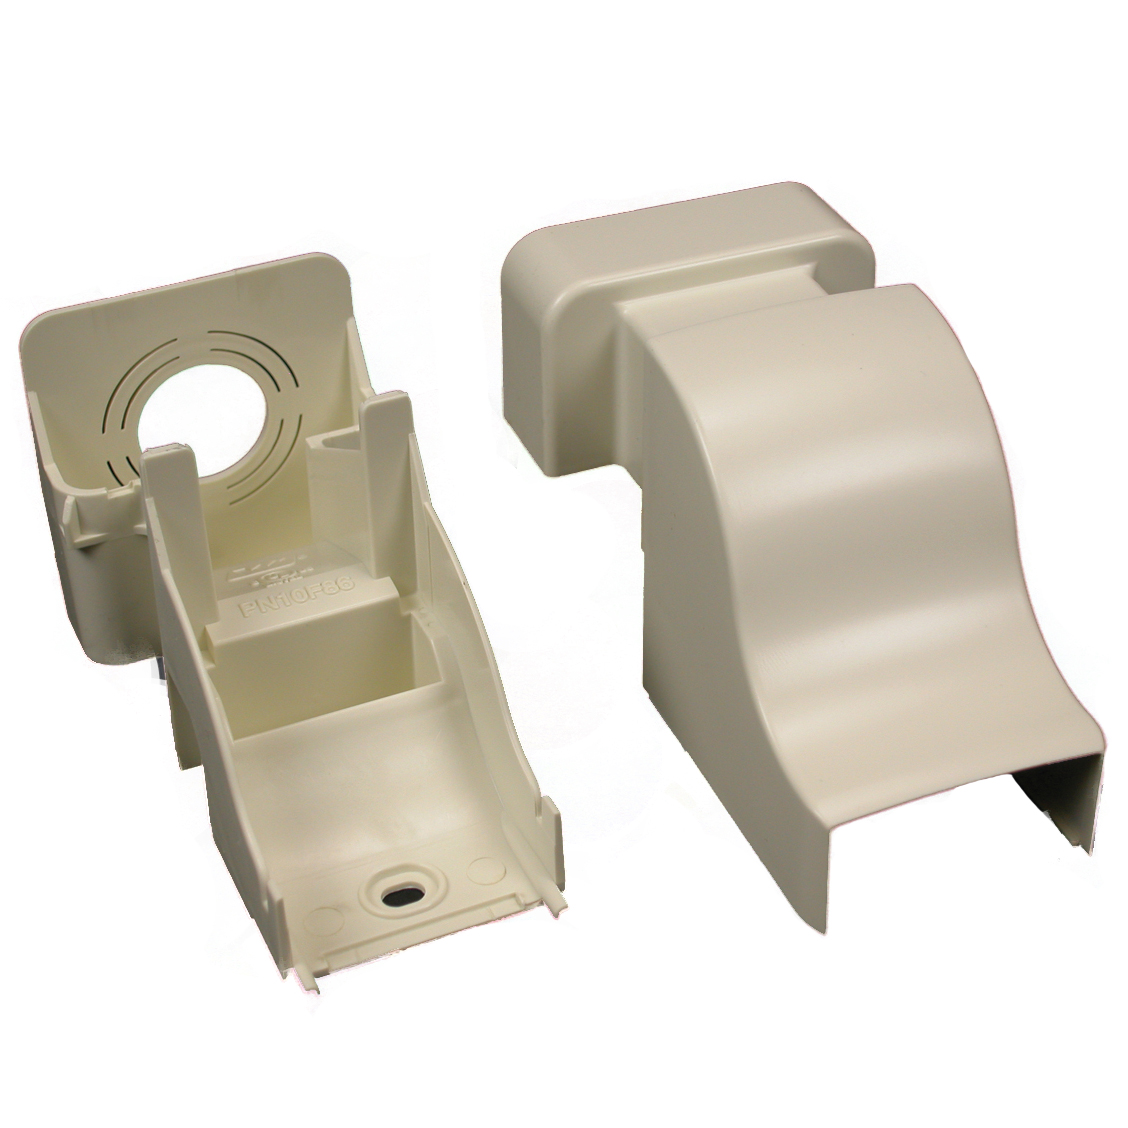 Legrand - Wiremold Eclipse PN03, PN05, PN10 Series Drop Ceiling Connector